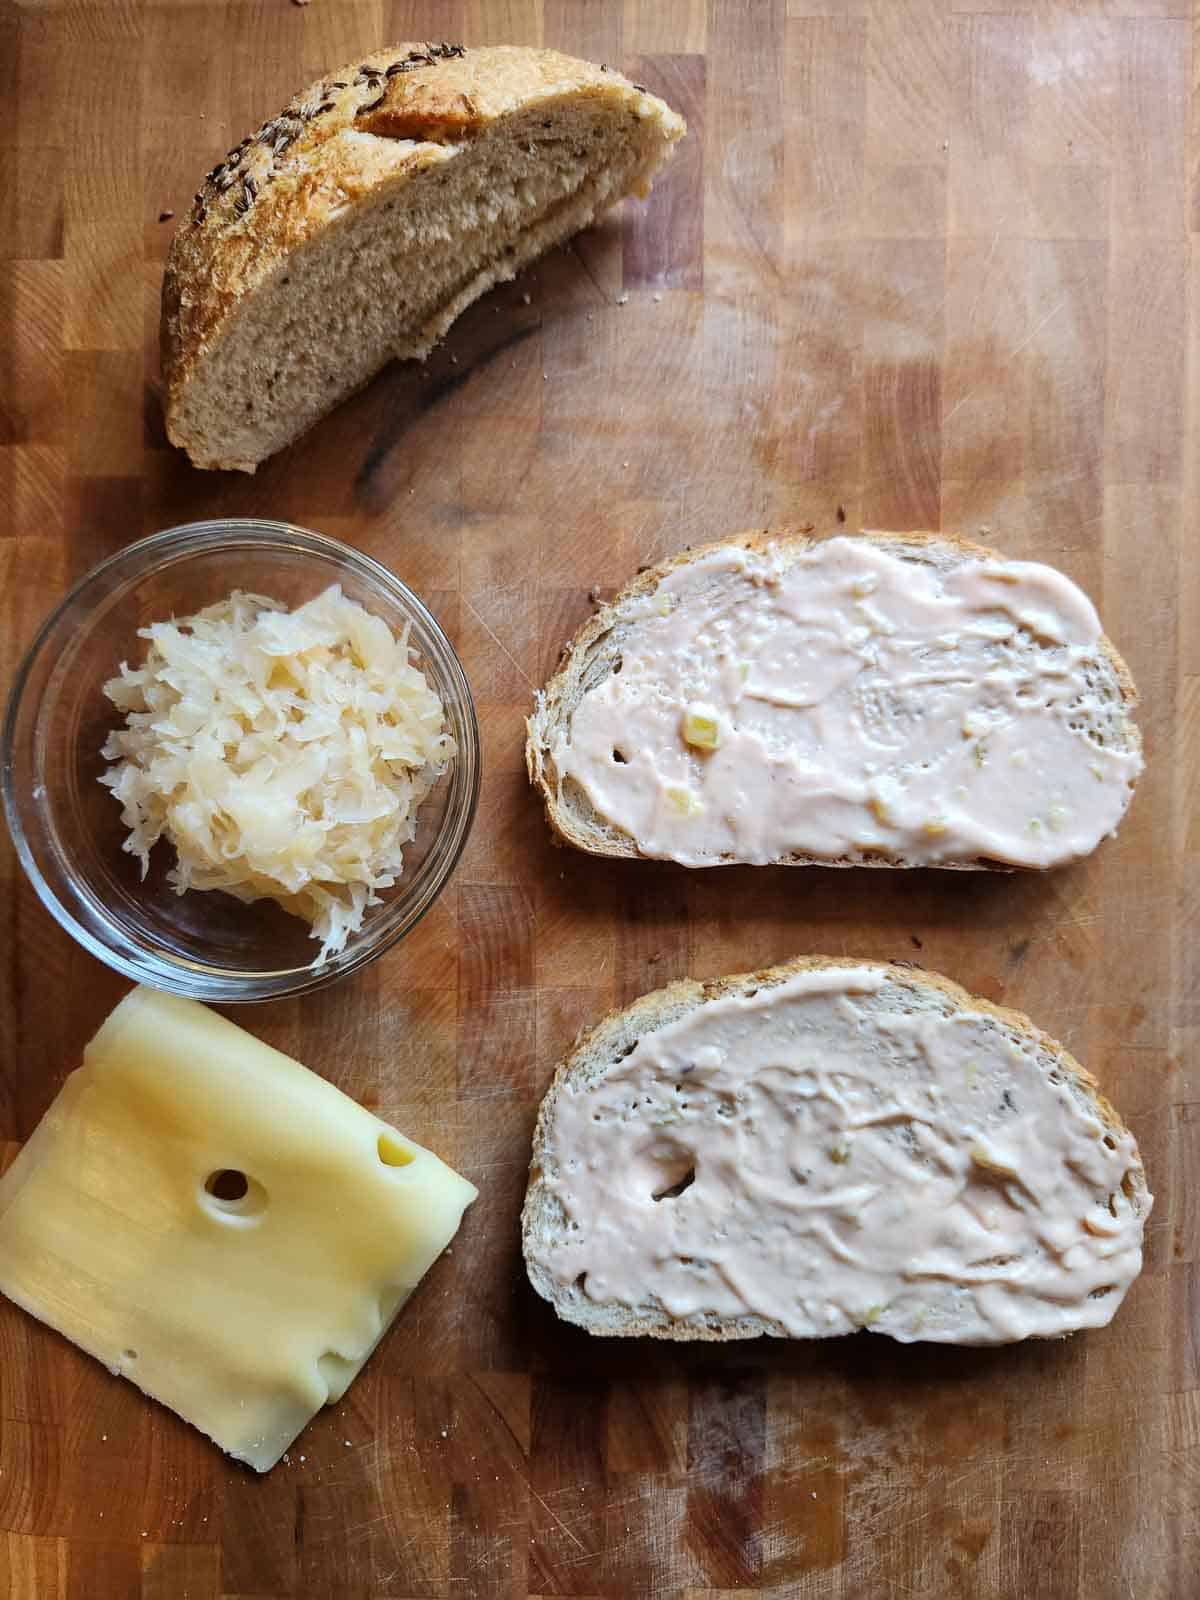 Bread, sauerkraut, dressing, and cheese on a cutting board.